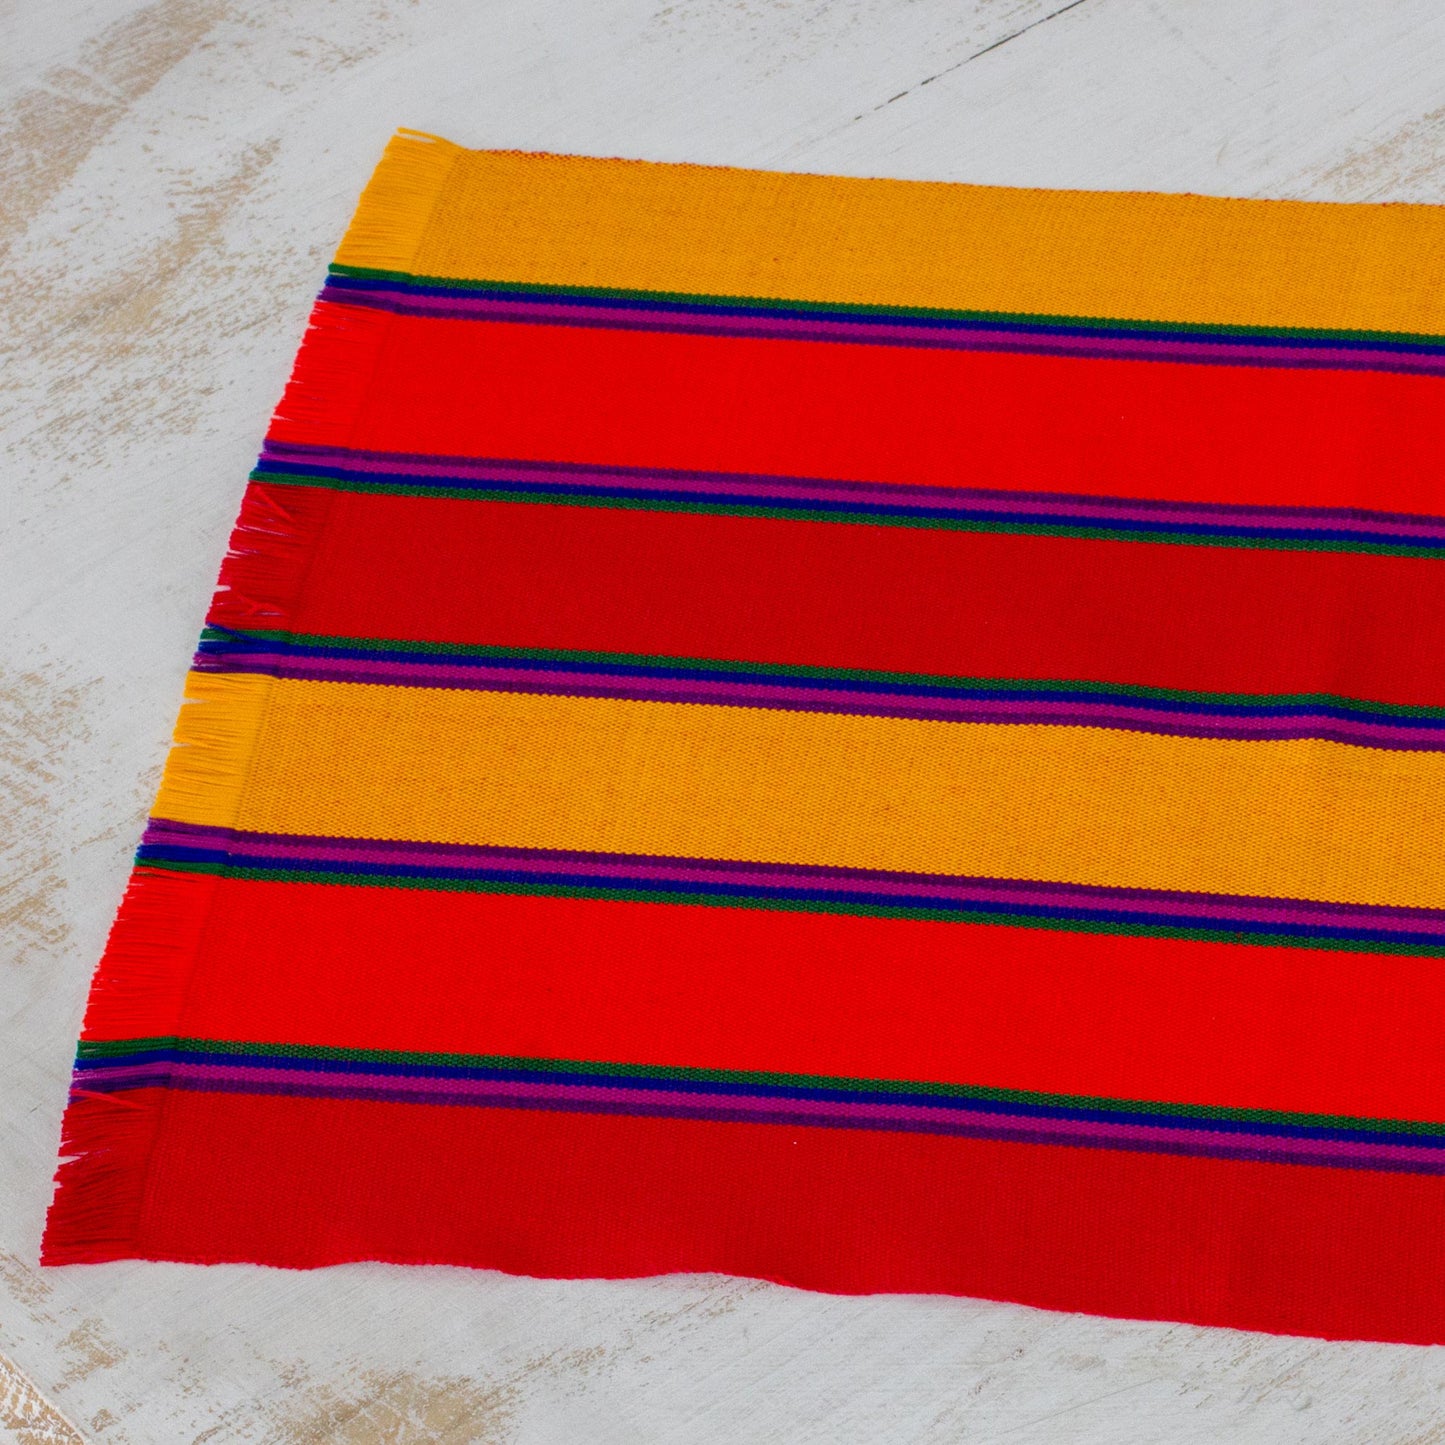 Country Sunset Six Handwoven Striped Cotton Placemats from Guatemala